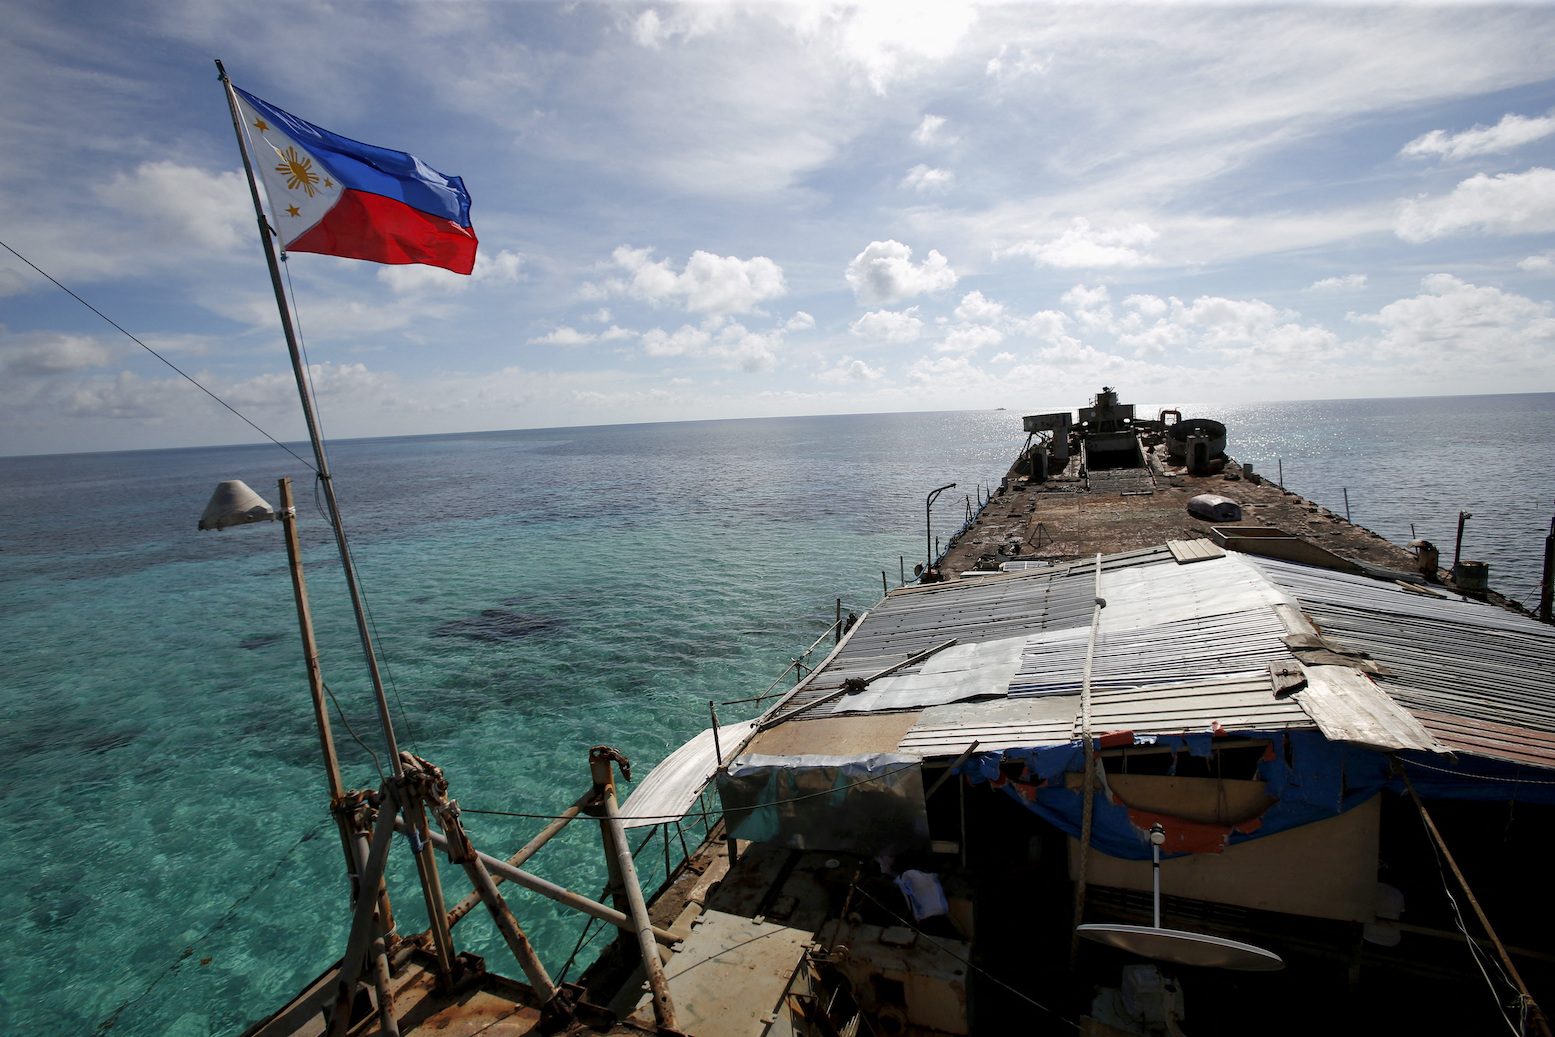 China blames ‘deliberate’ actions by Philippines boats for Ayungin collision